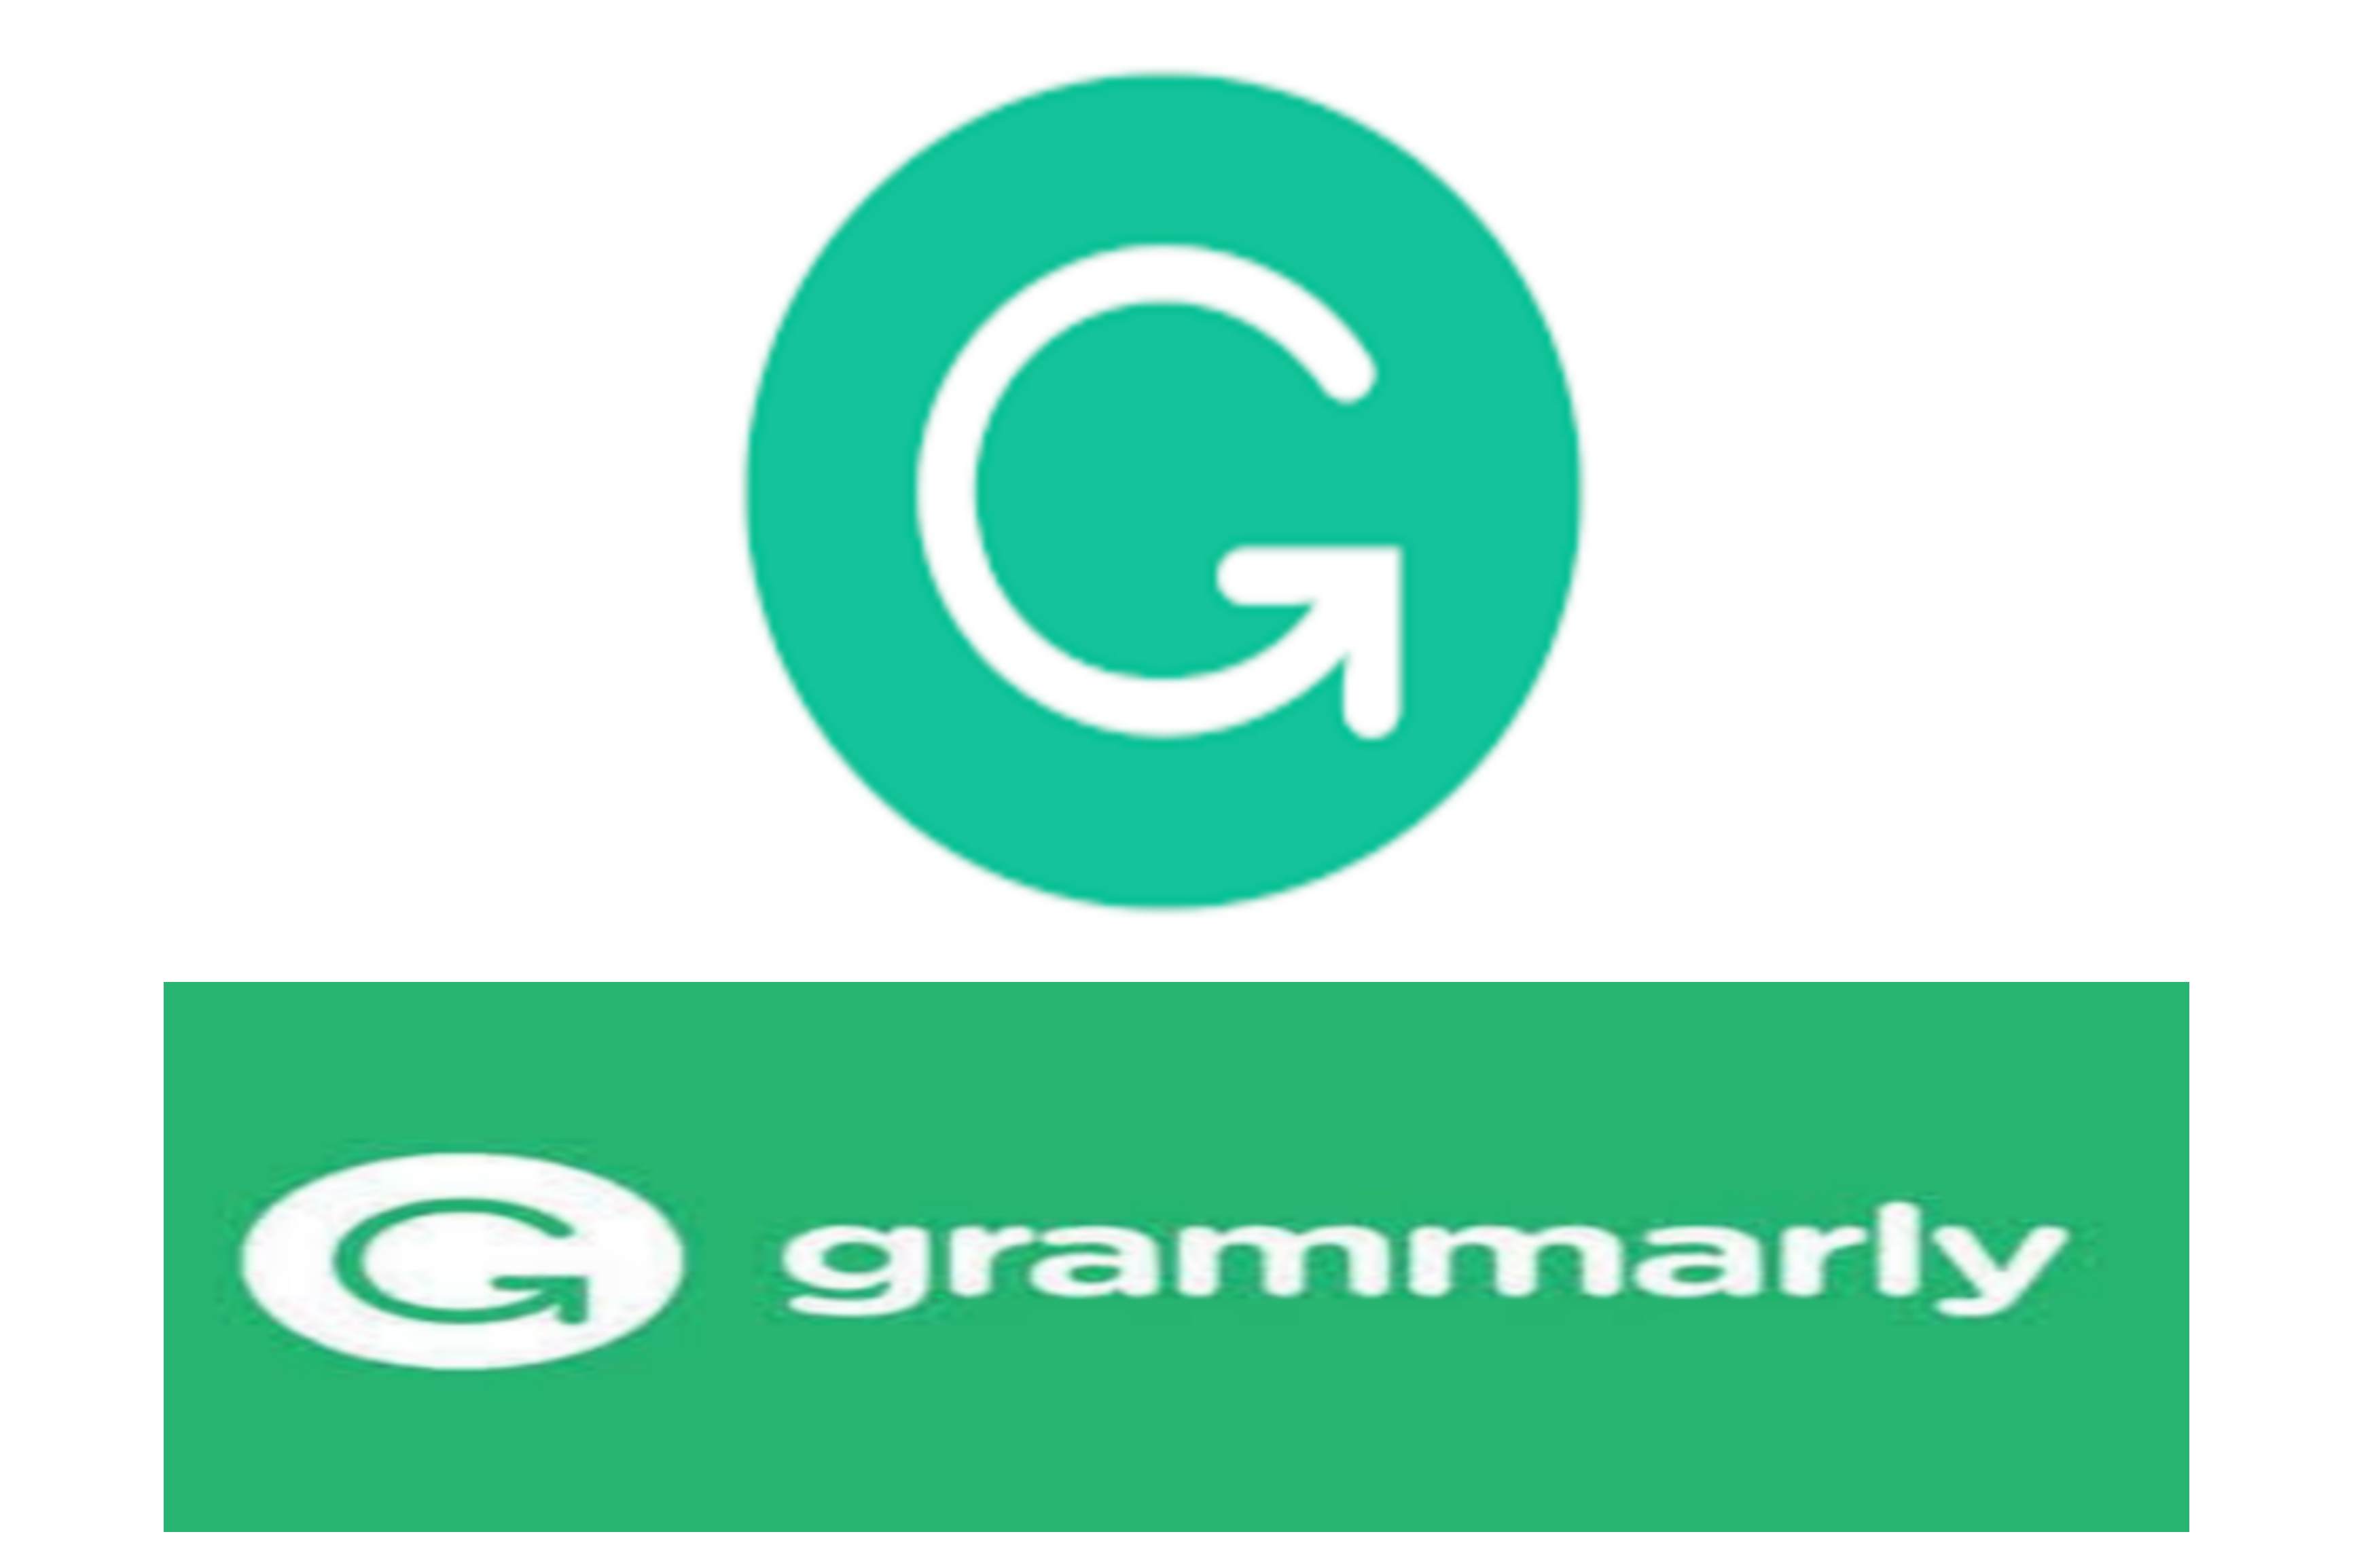 Grammarly download for Chromegrammarly.com freeGrammarly download for Windows 10Grammarly loginGrammarly checkGram marly application  Grammarly application free download for Android Grammarly online Download Grammarly for Word